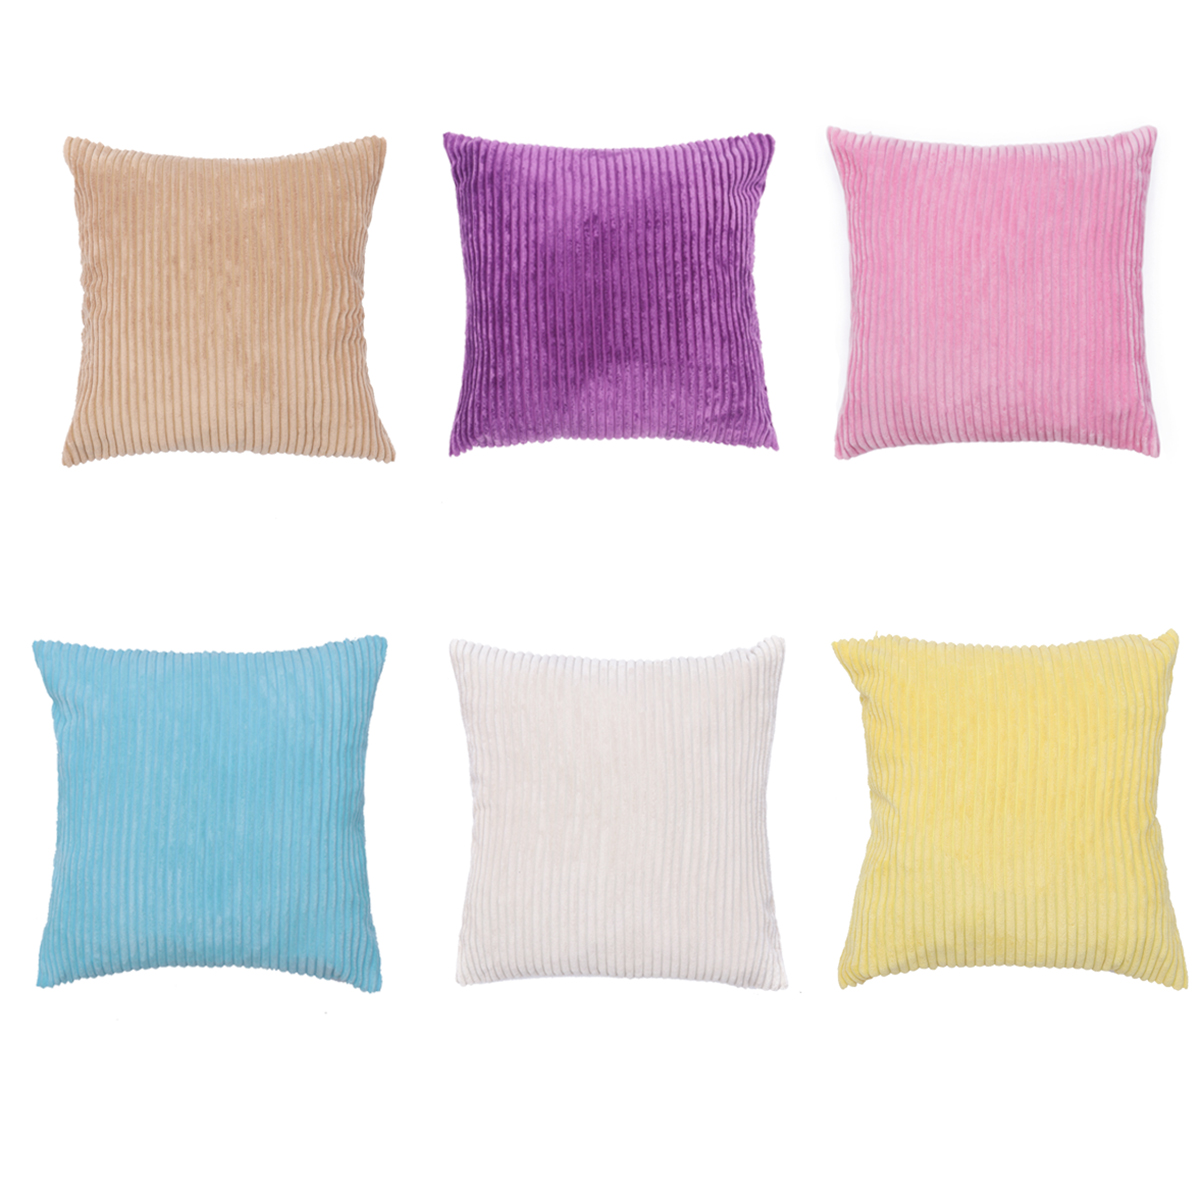 45X45cm-Corduroy-Pillow-Case-Colorful-Cushion-Cover-Throw-Home-Sofa-Decorations-1518541-2